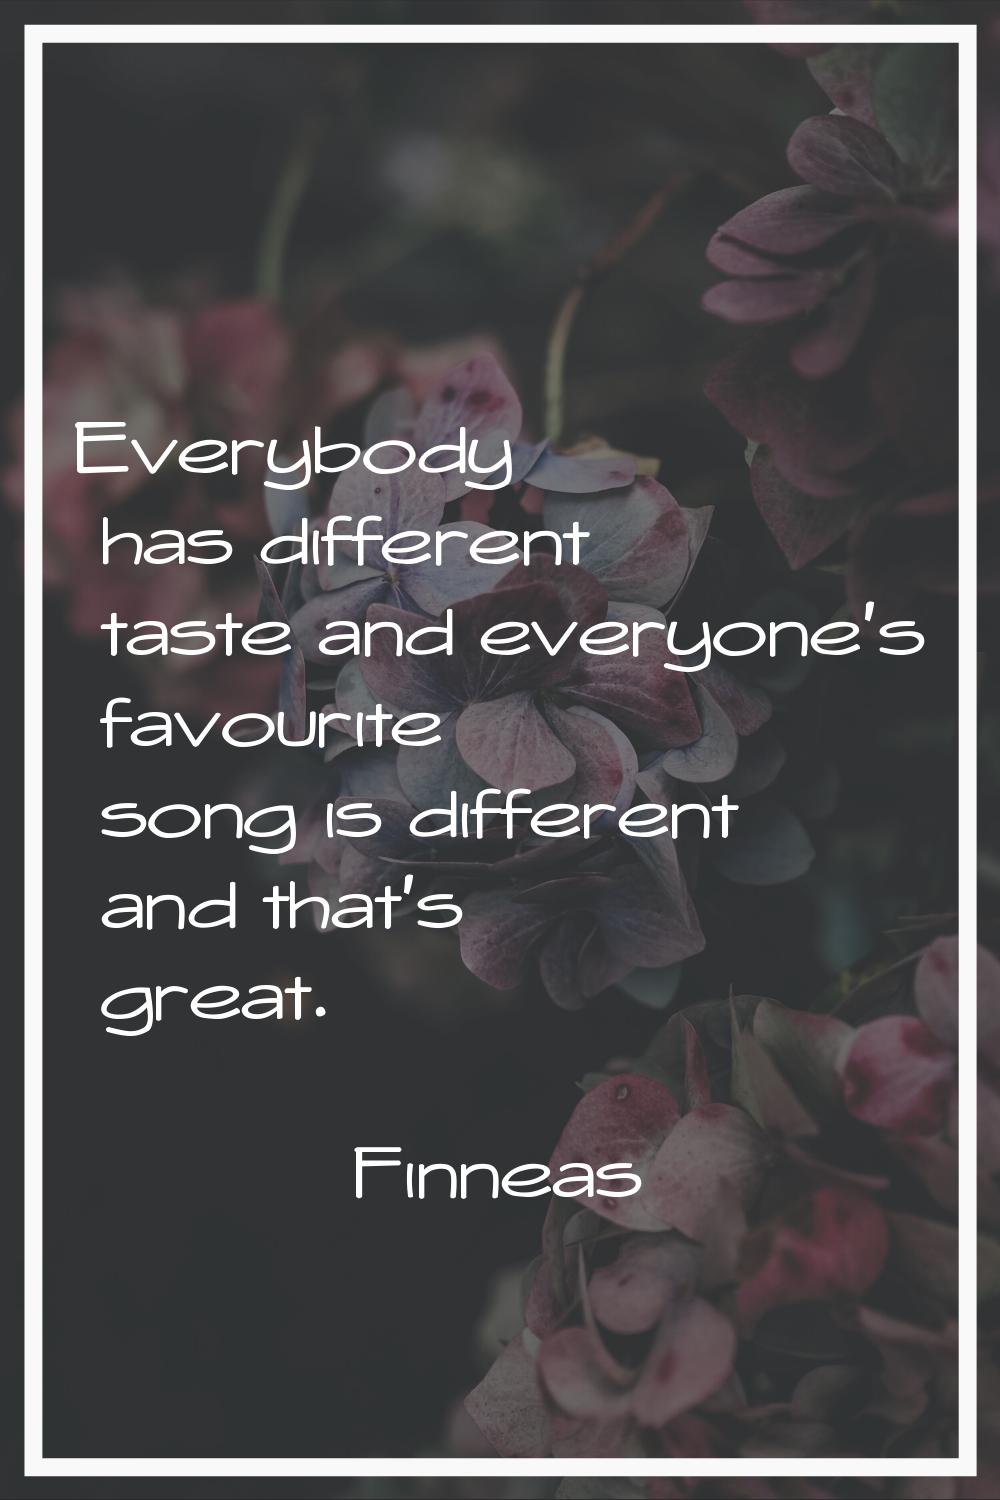 Everybody has different taste and everyone's favourite song is different and that's great.